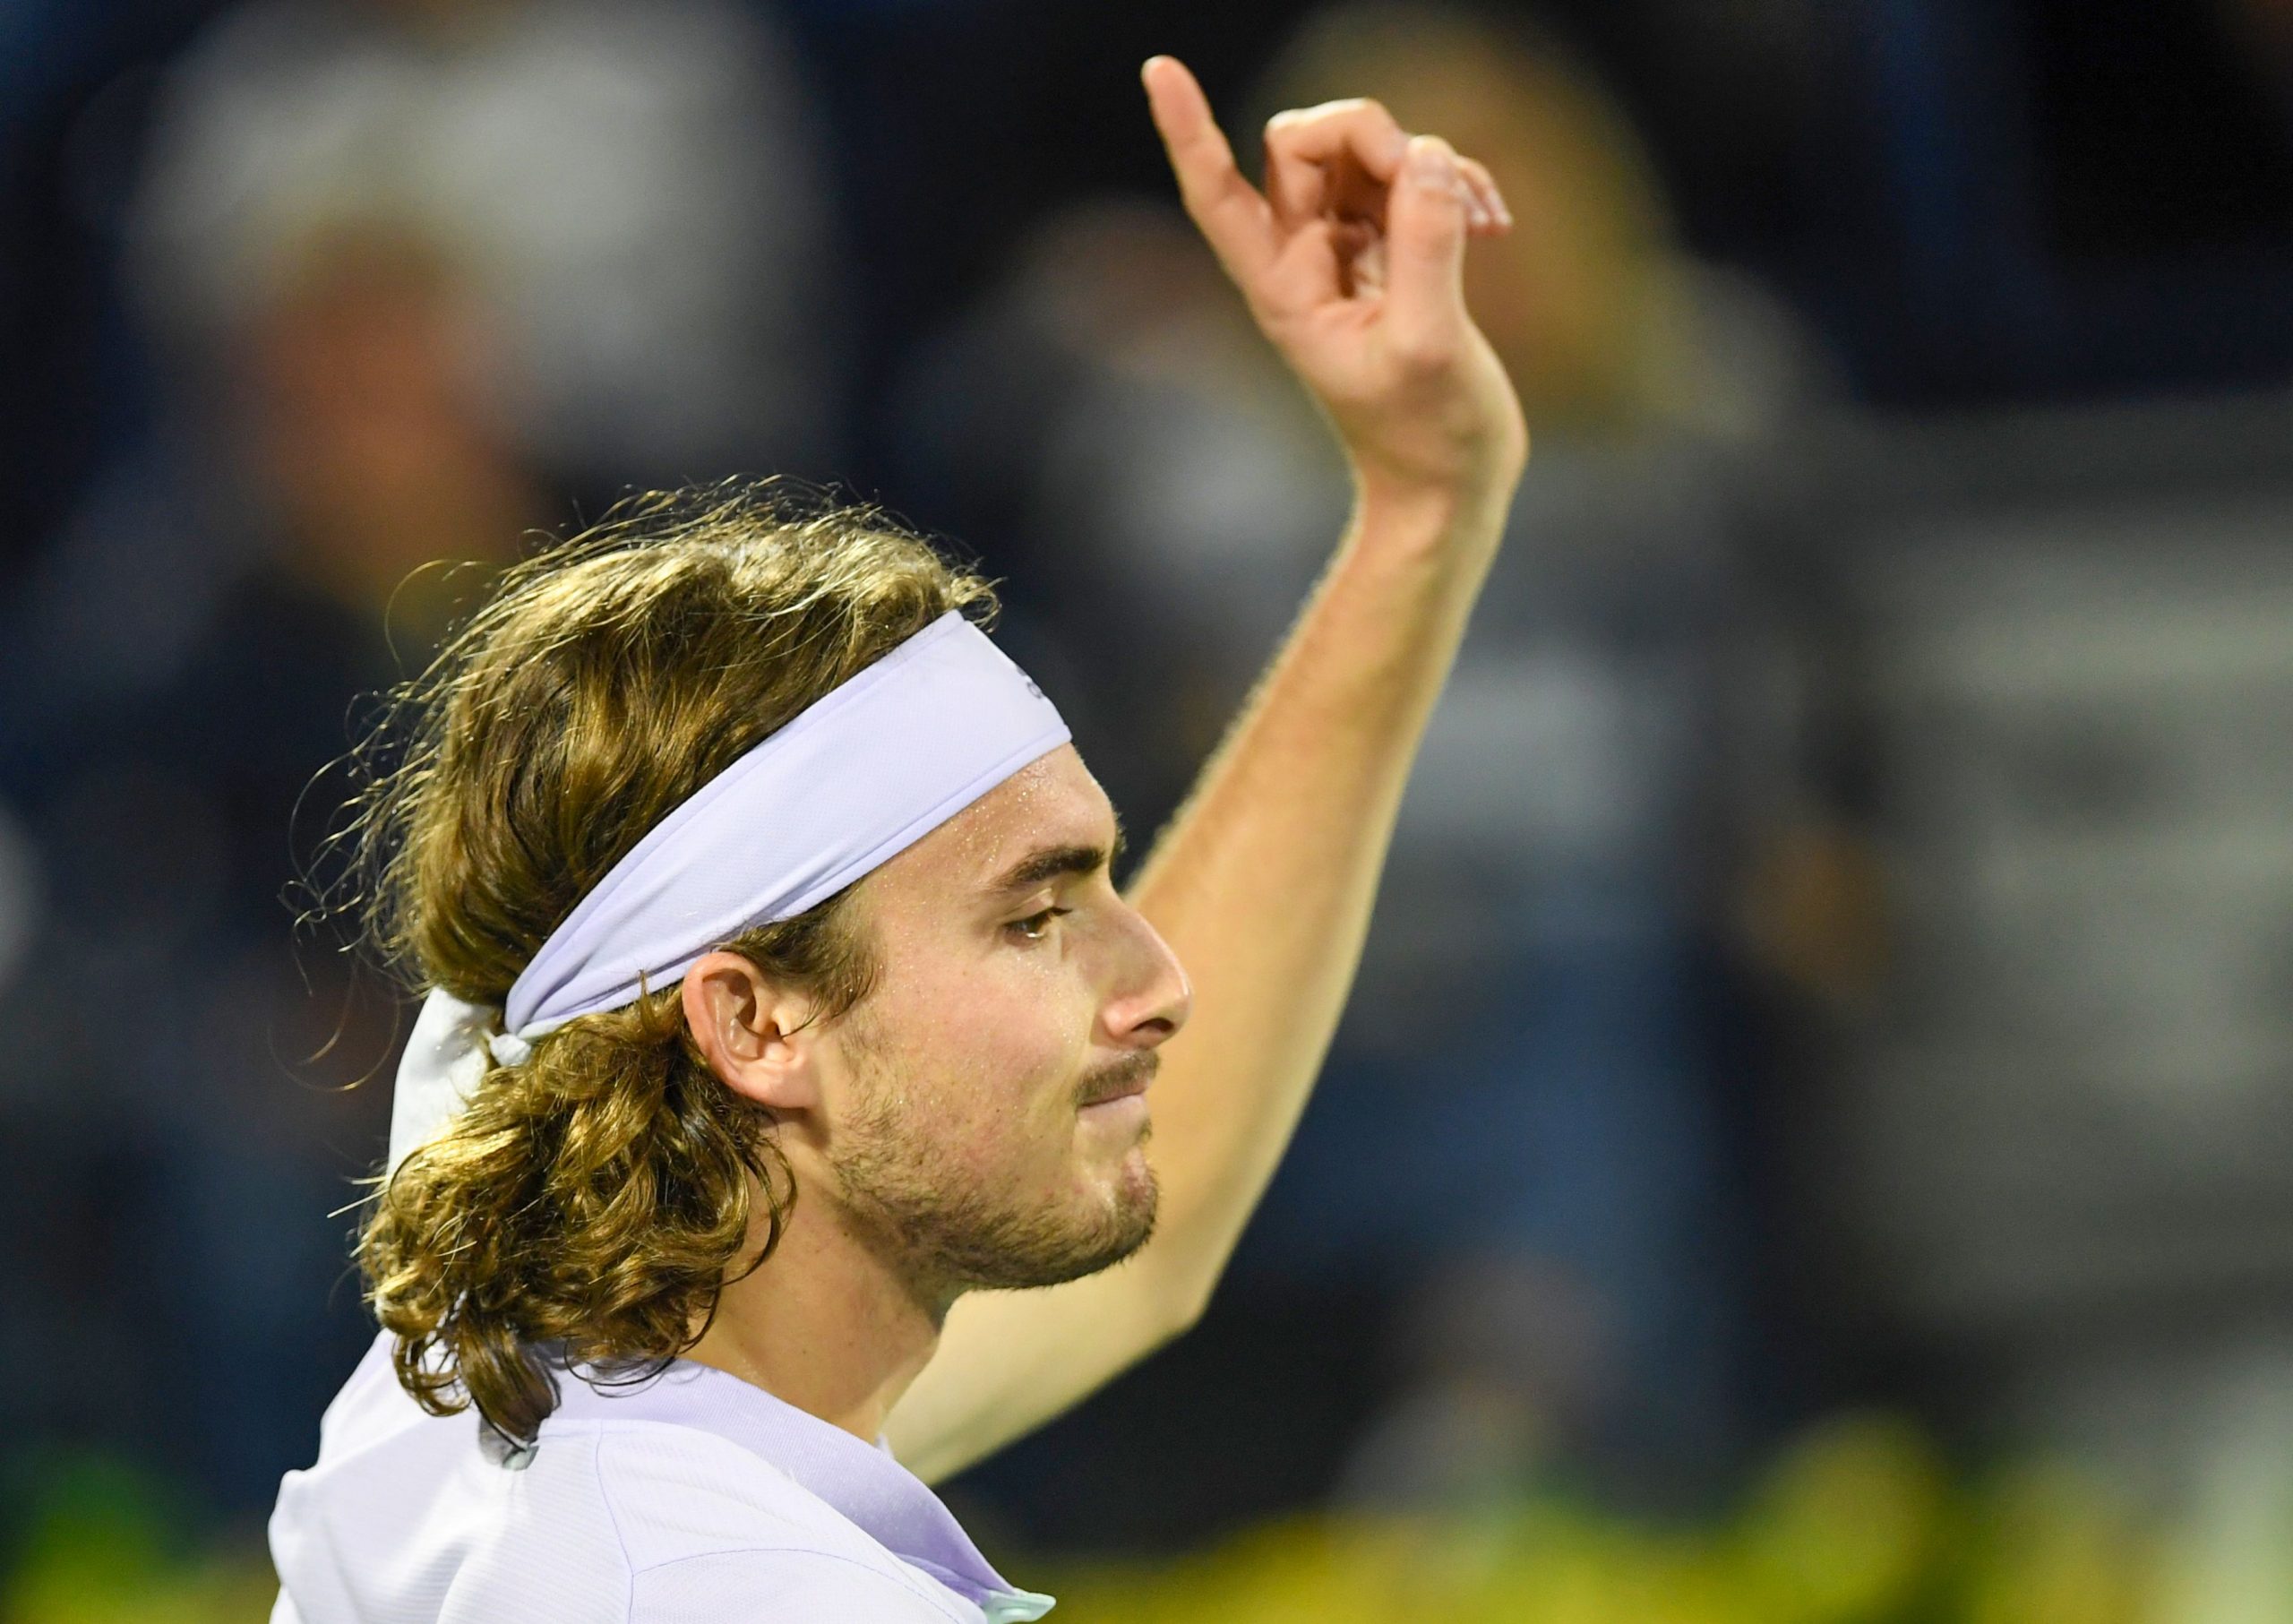 Stefanos Tsitsipas is one of the best tennis players in the world